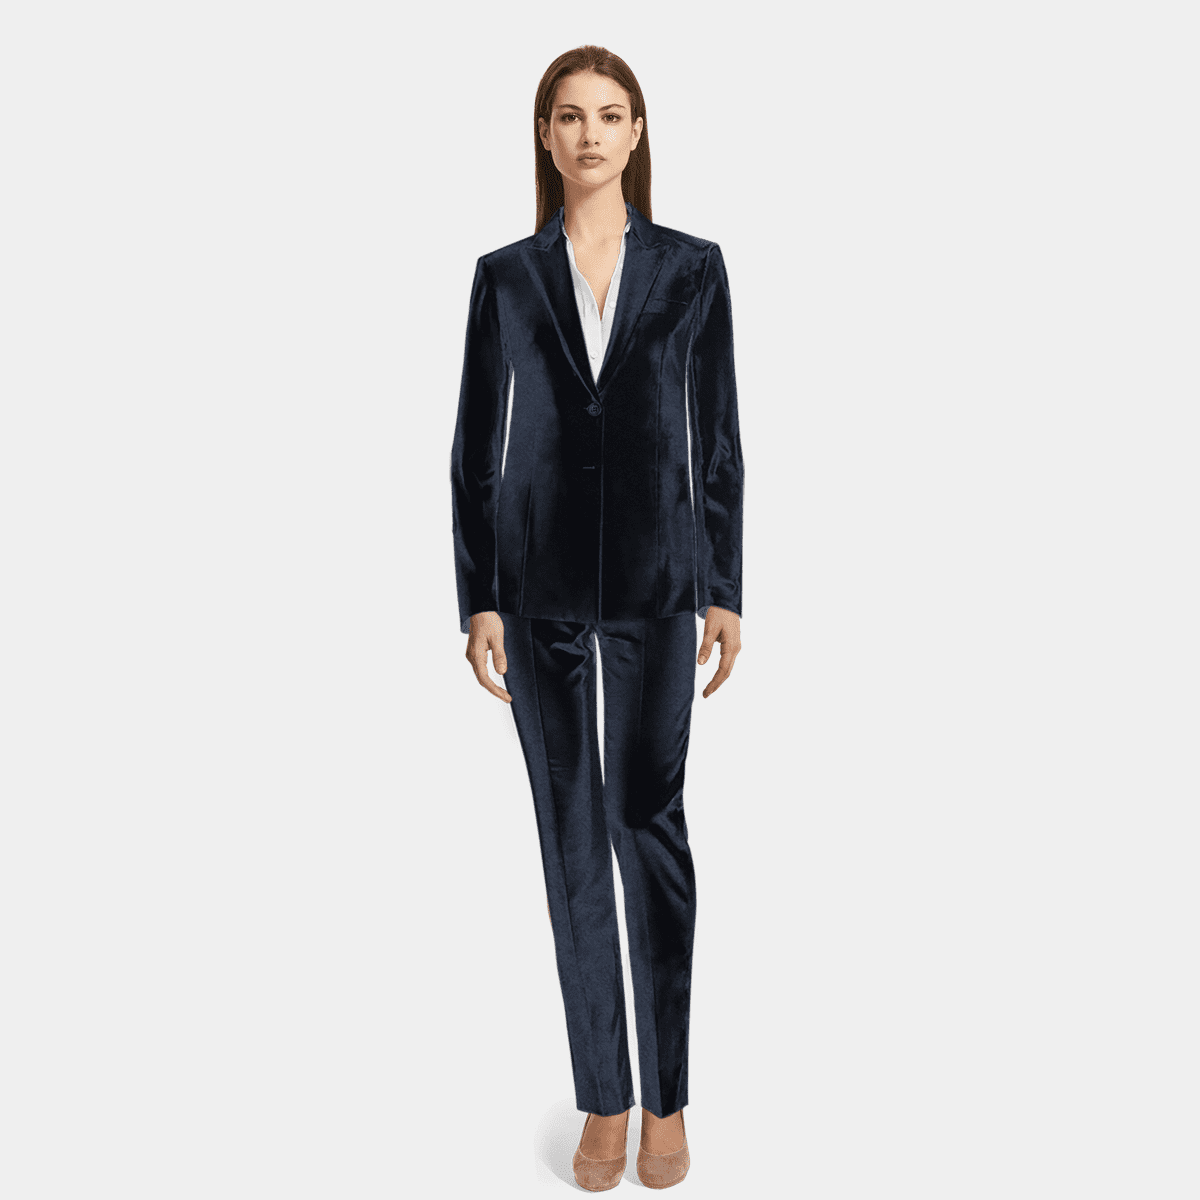 Blue double breasted Wide Leg Pant Suit - relaxed fit